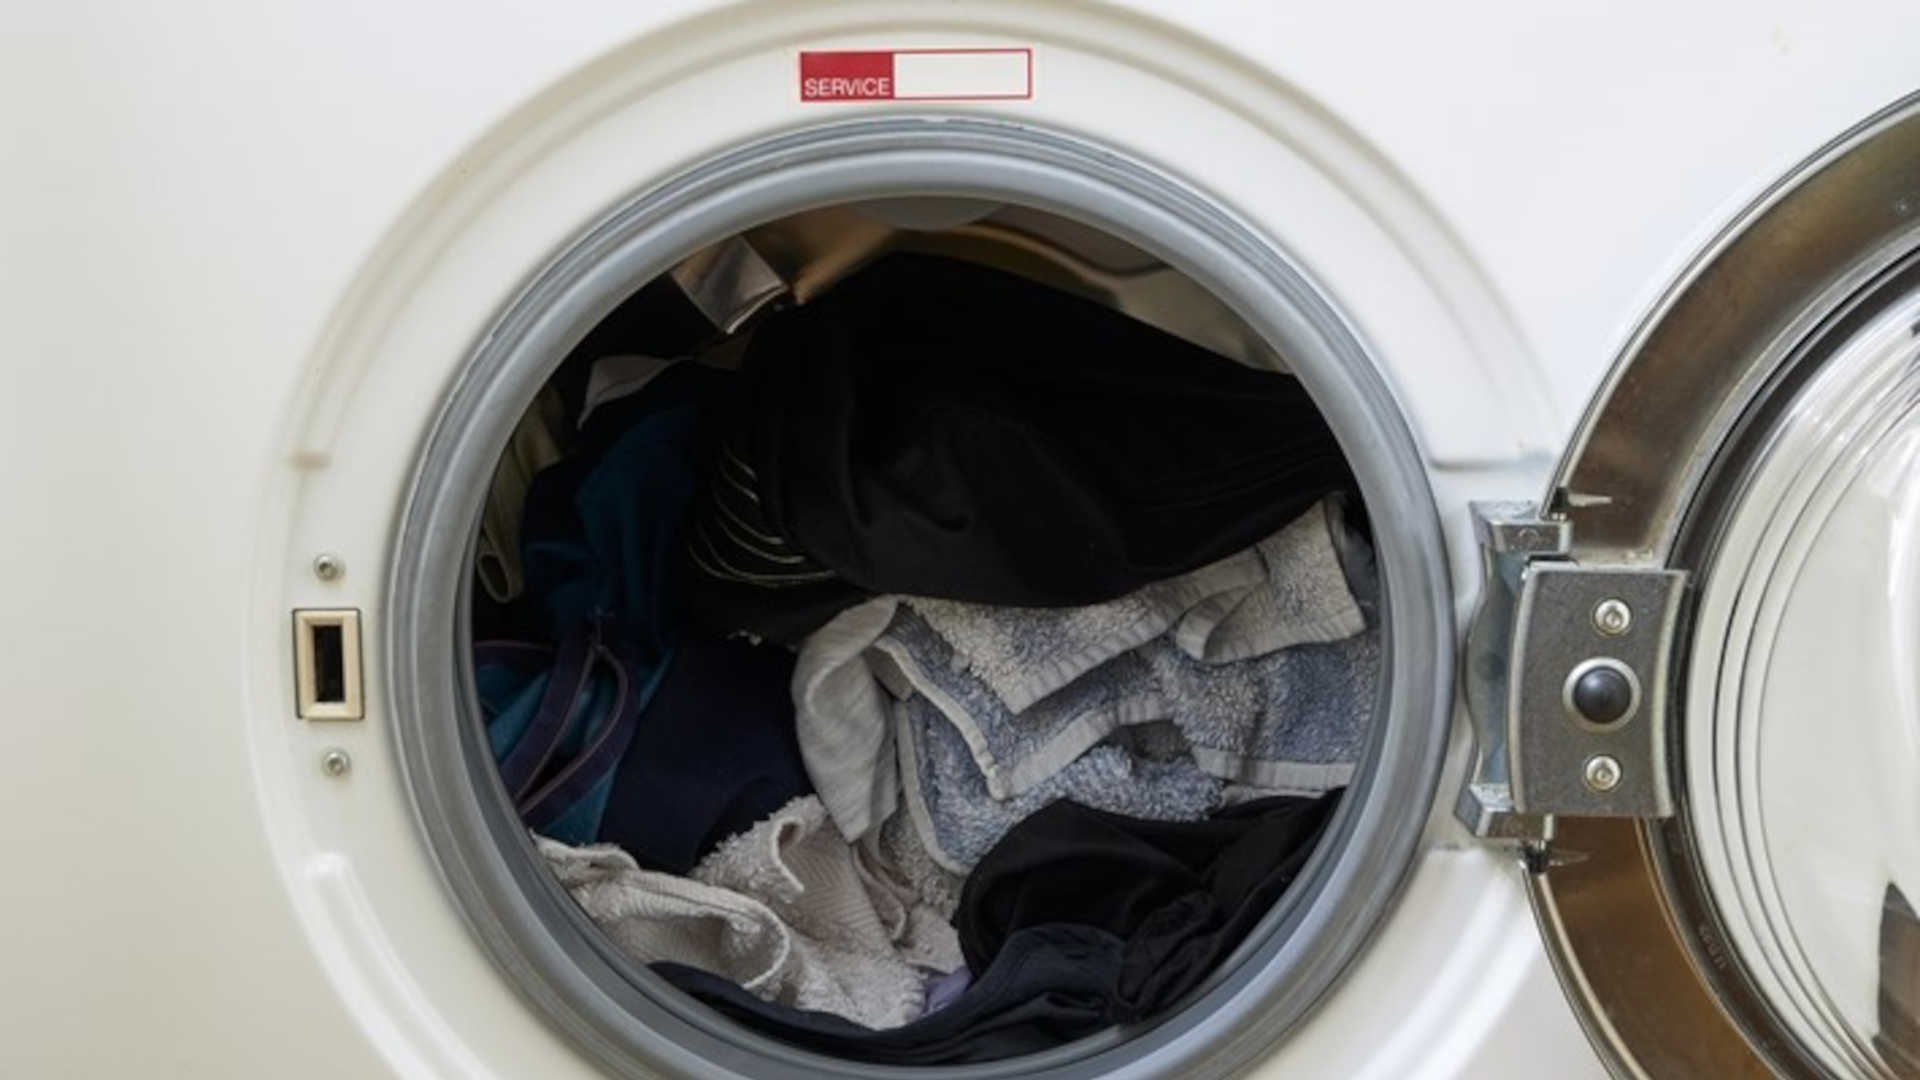 What should you never put in a washing machine